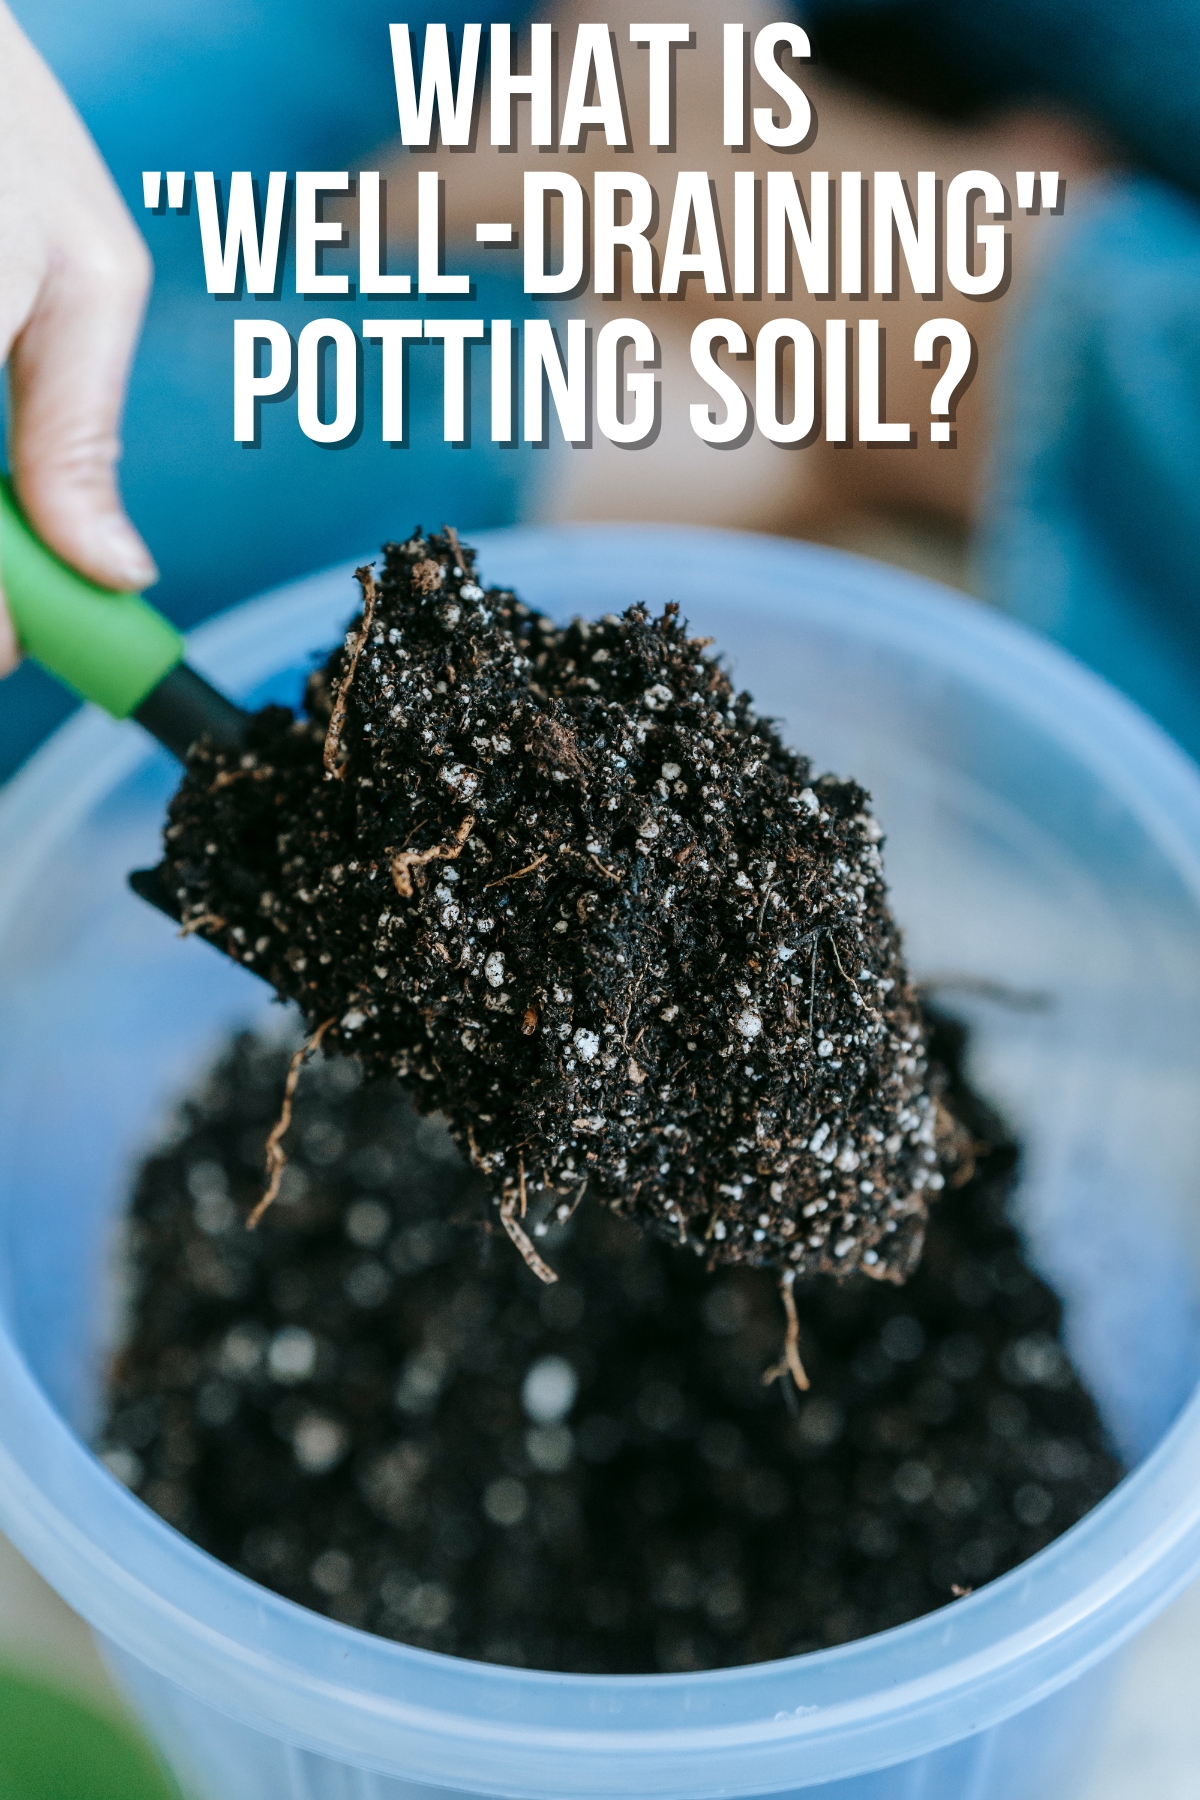 what is "well-draining" potting soil?